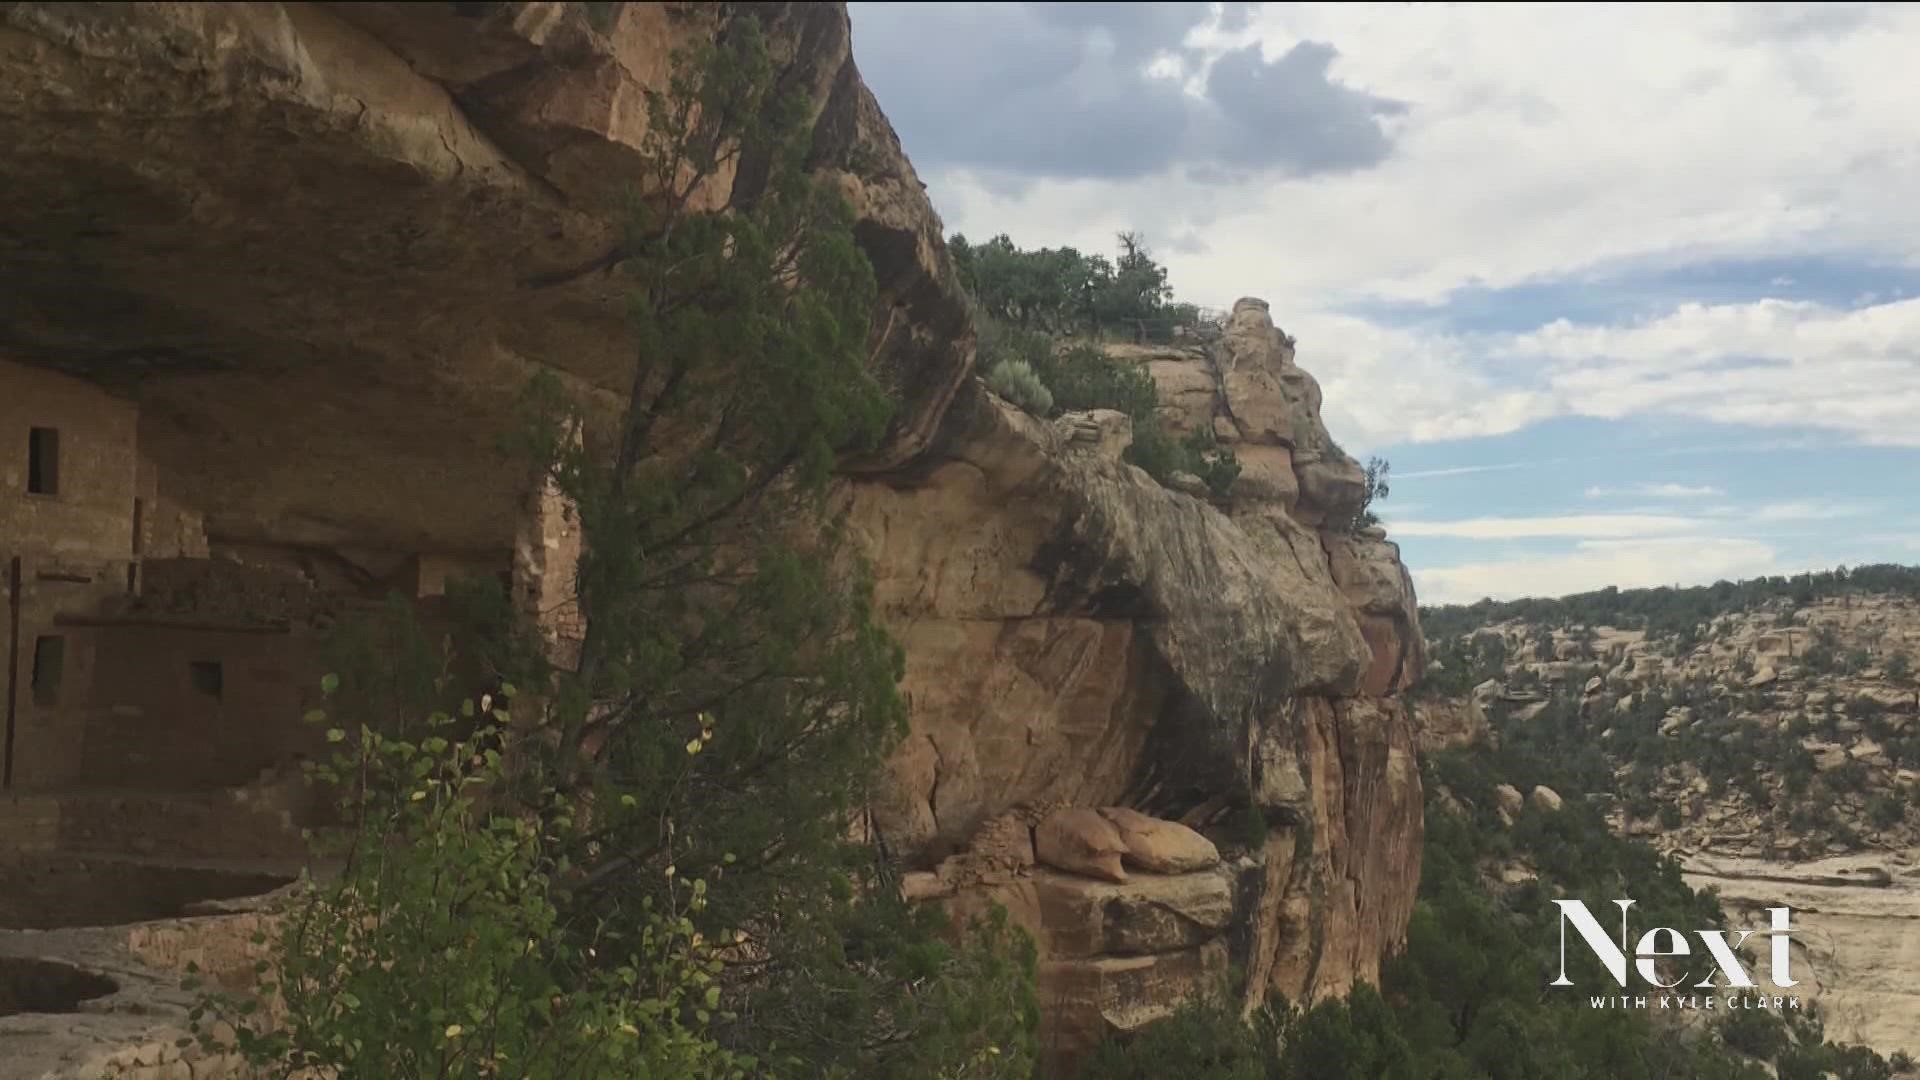 The Coalition to Protect America's National Parks and Archaeology Southwest reports that Mesa Verde and Dinosaur National Monument are among those at risk.